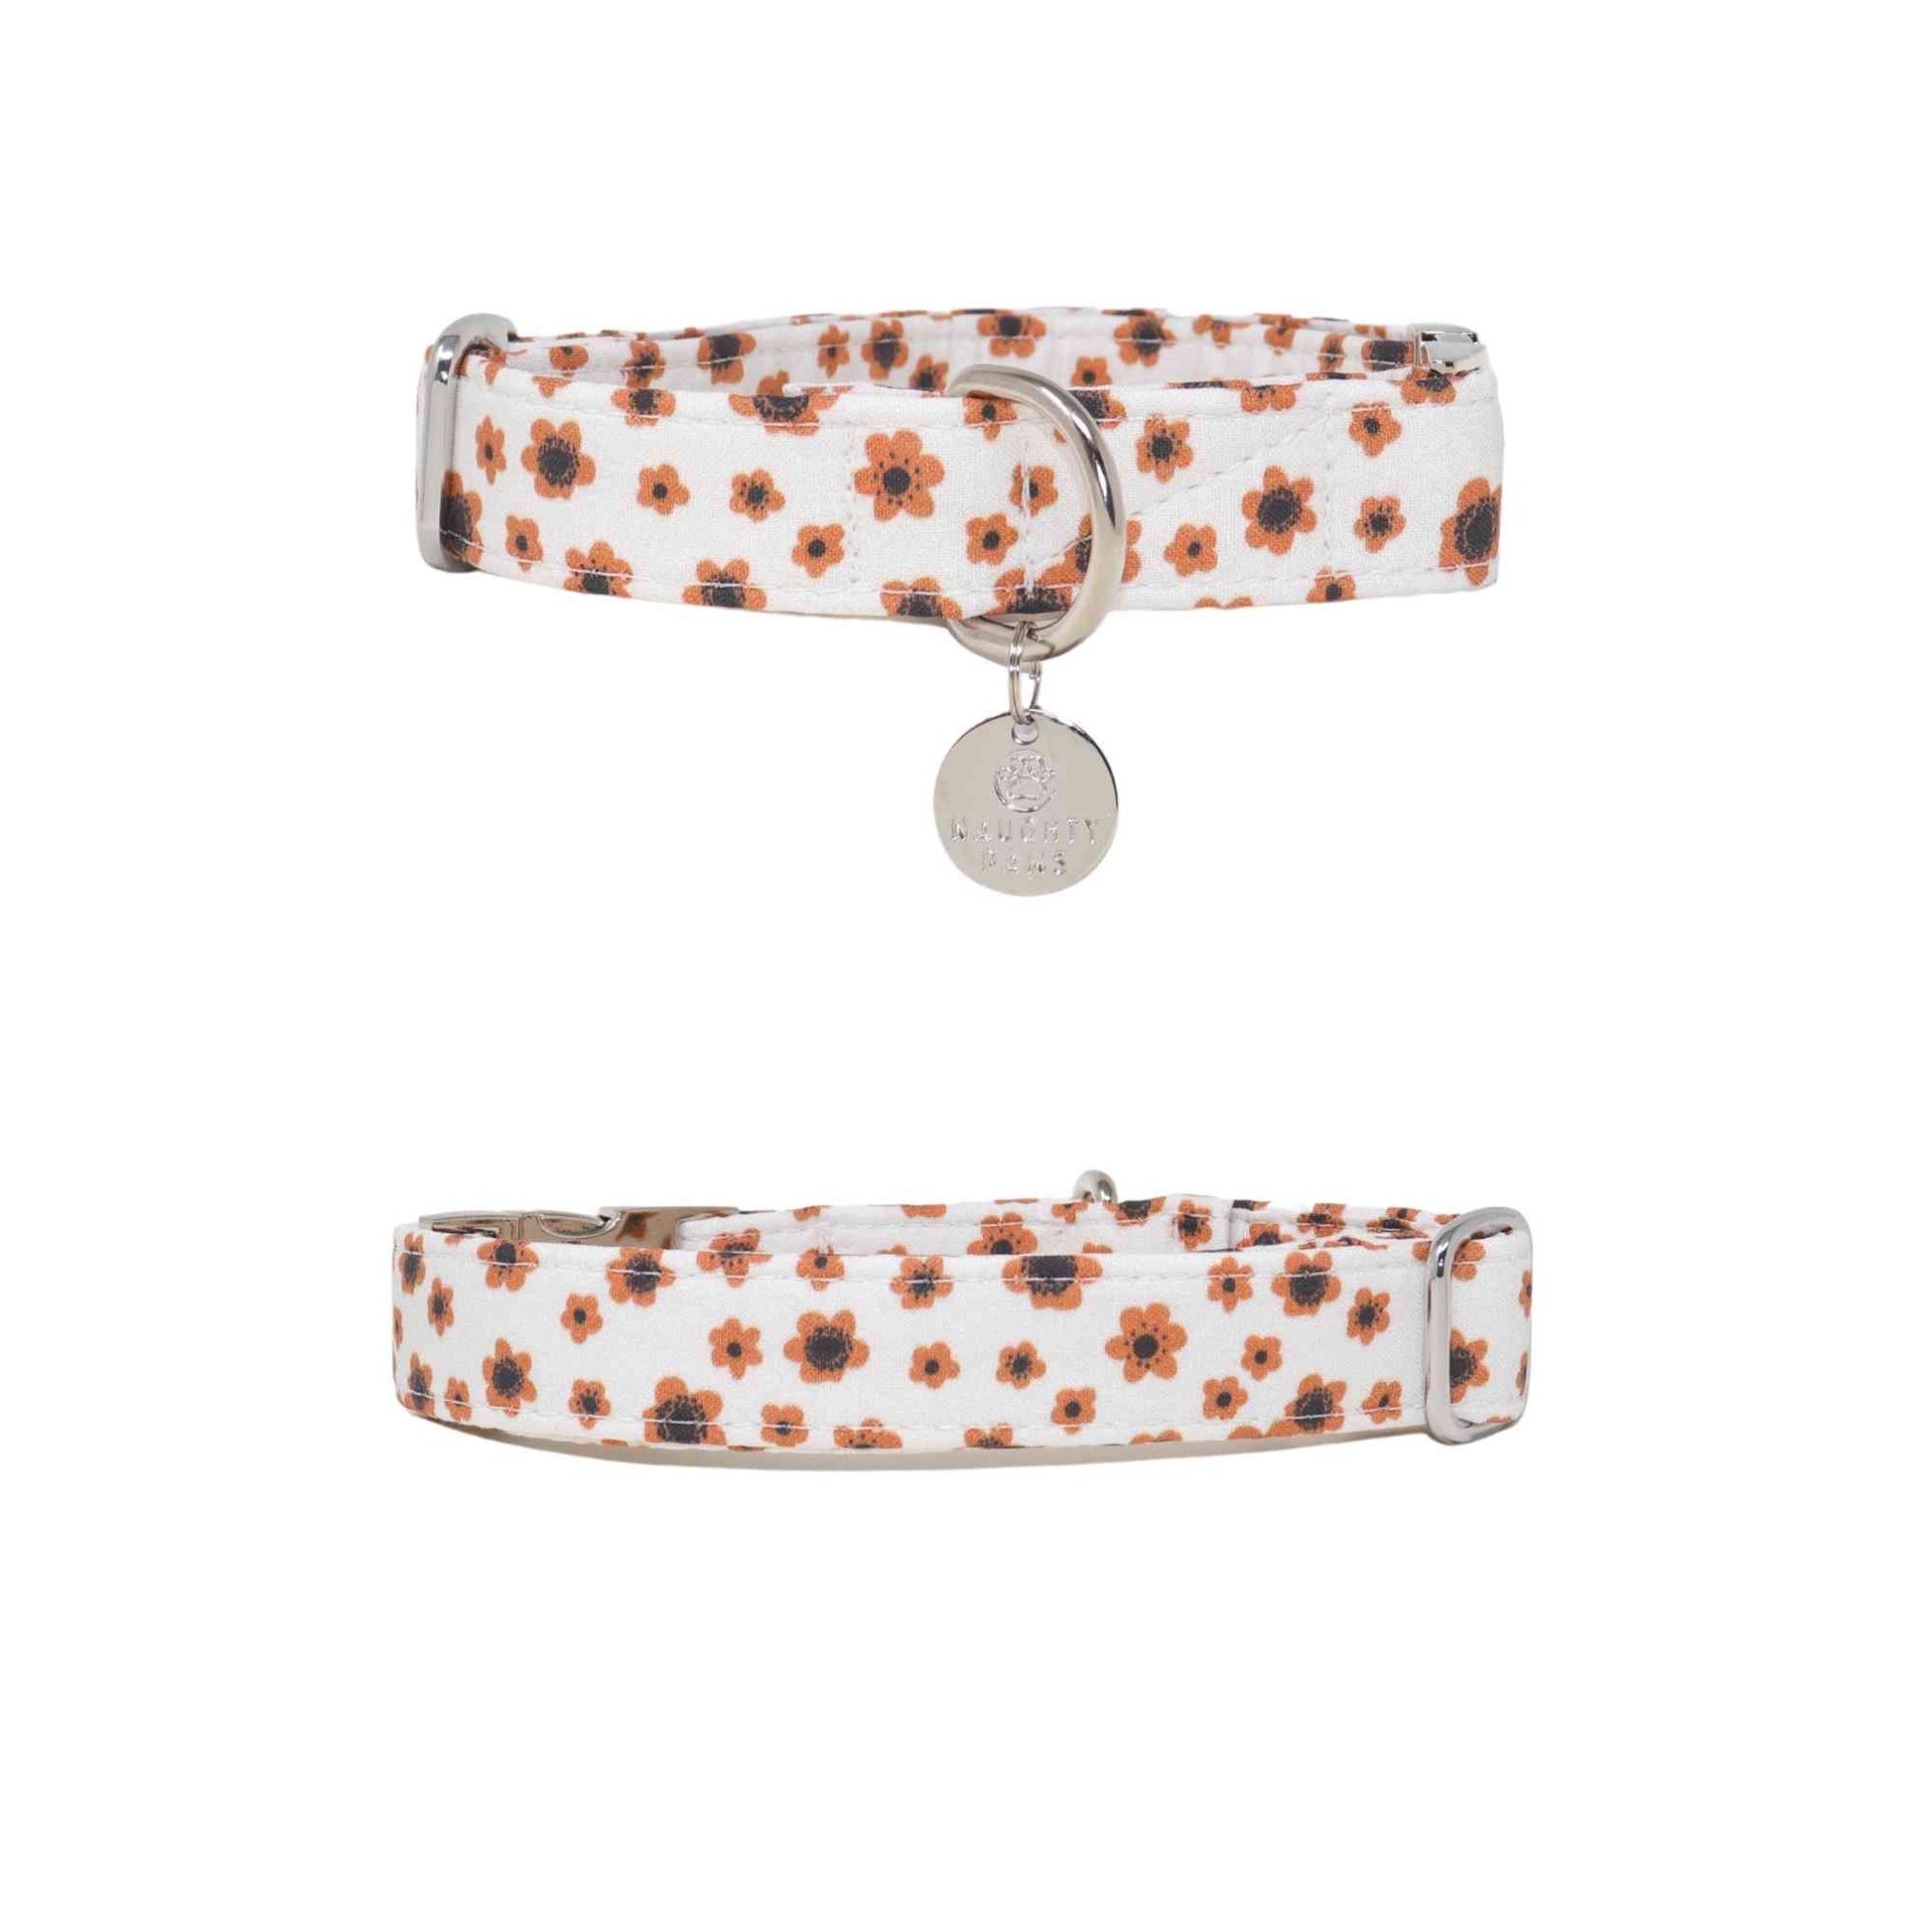 Looking for a collar that's both bohemian and beautiful? Our "Cappuccino Blooms" Boho Brown and Cream Floral Girl Dog Collar is the perfect choice! Available in sizes ranging from extra extra small to extra large, our collar is designed to fit dogs of all sizes. The unique and stylish floral pattern features shades of brown and cream, creating a subtle and sophisticated look. 